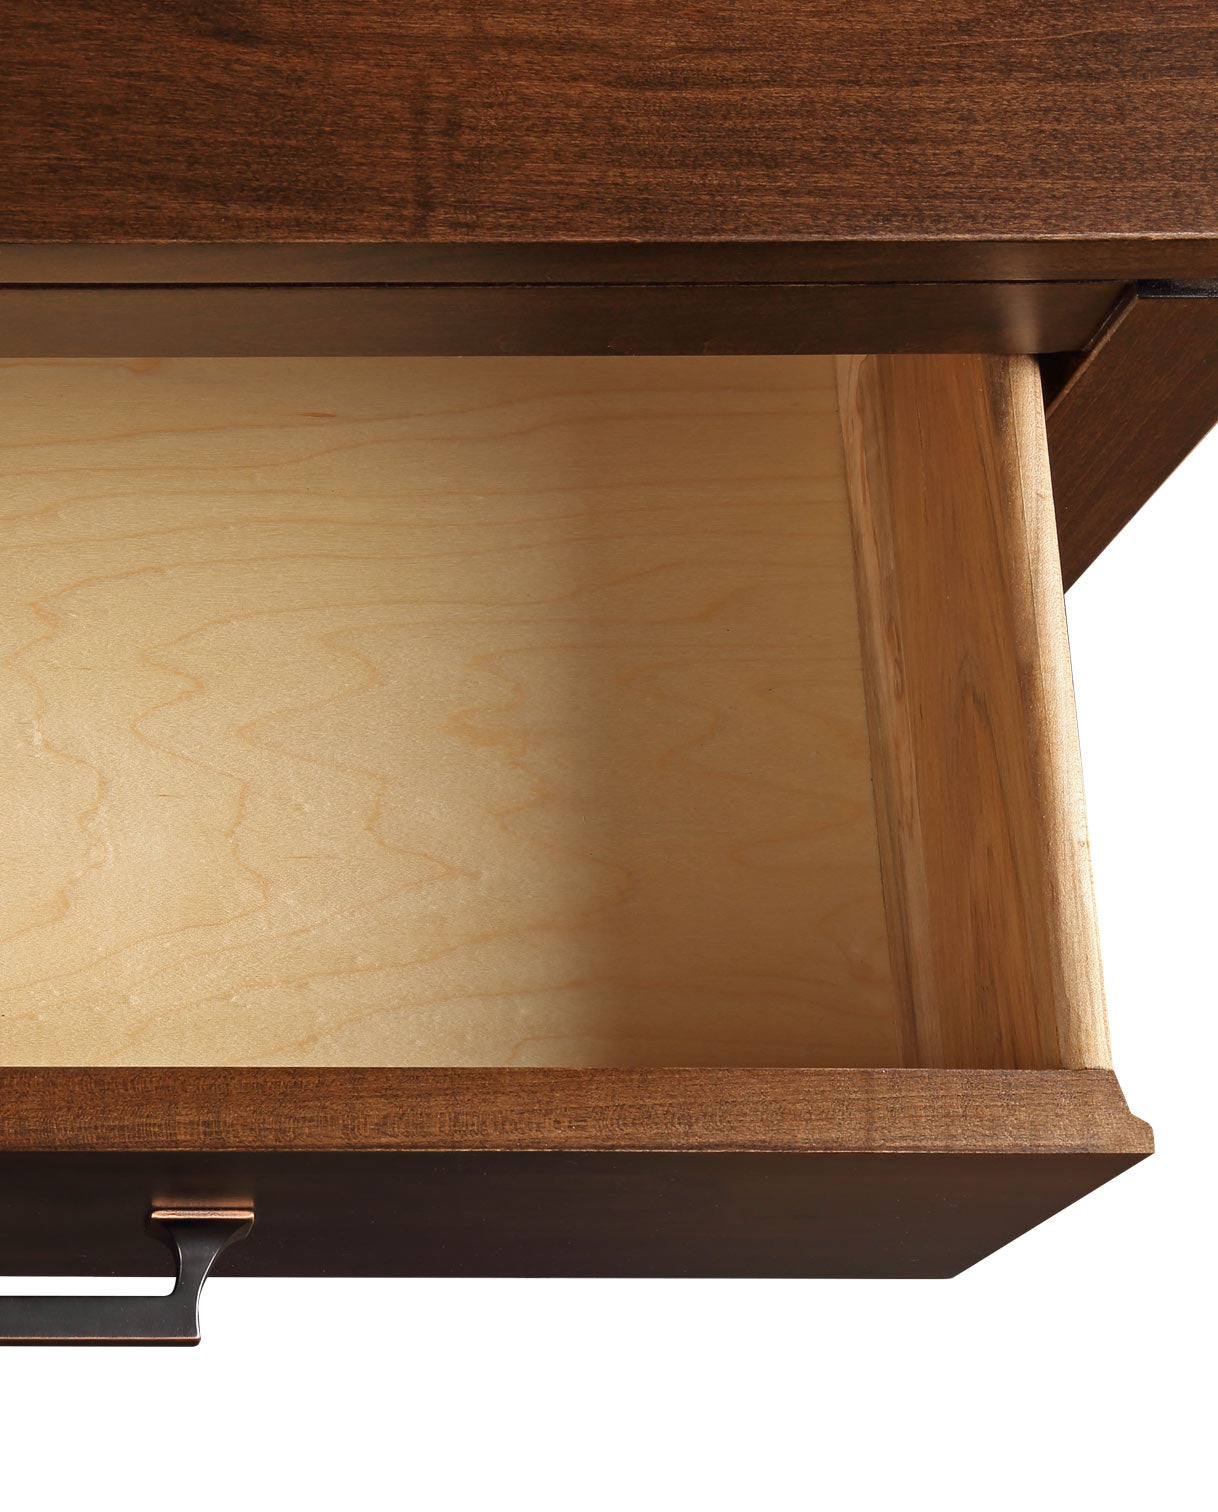 Close up of an open drawer showing maple wood grain